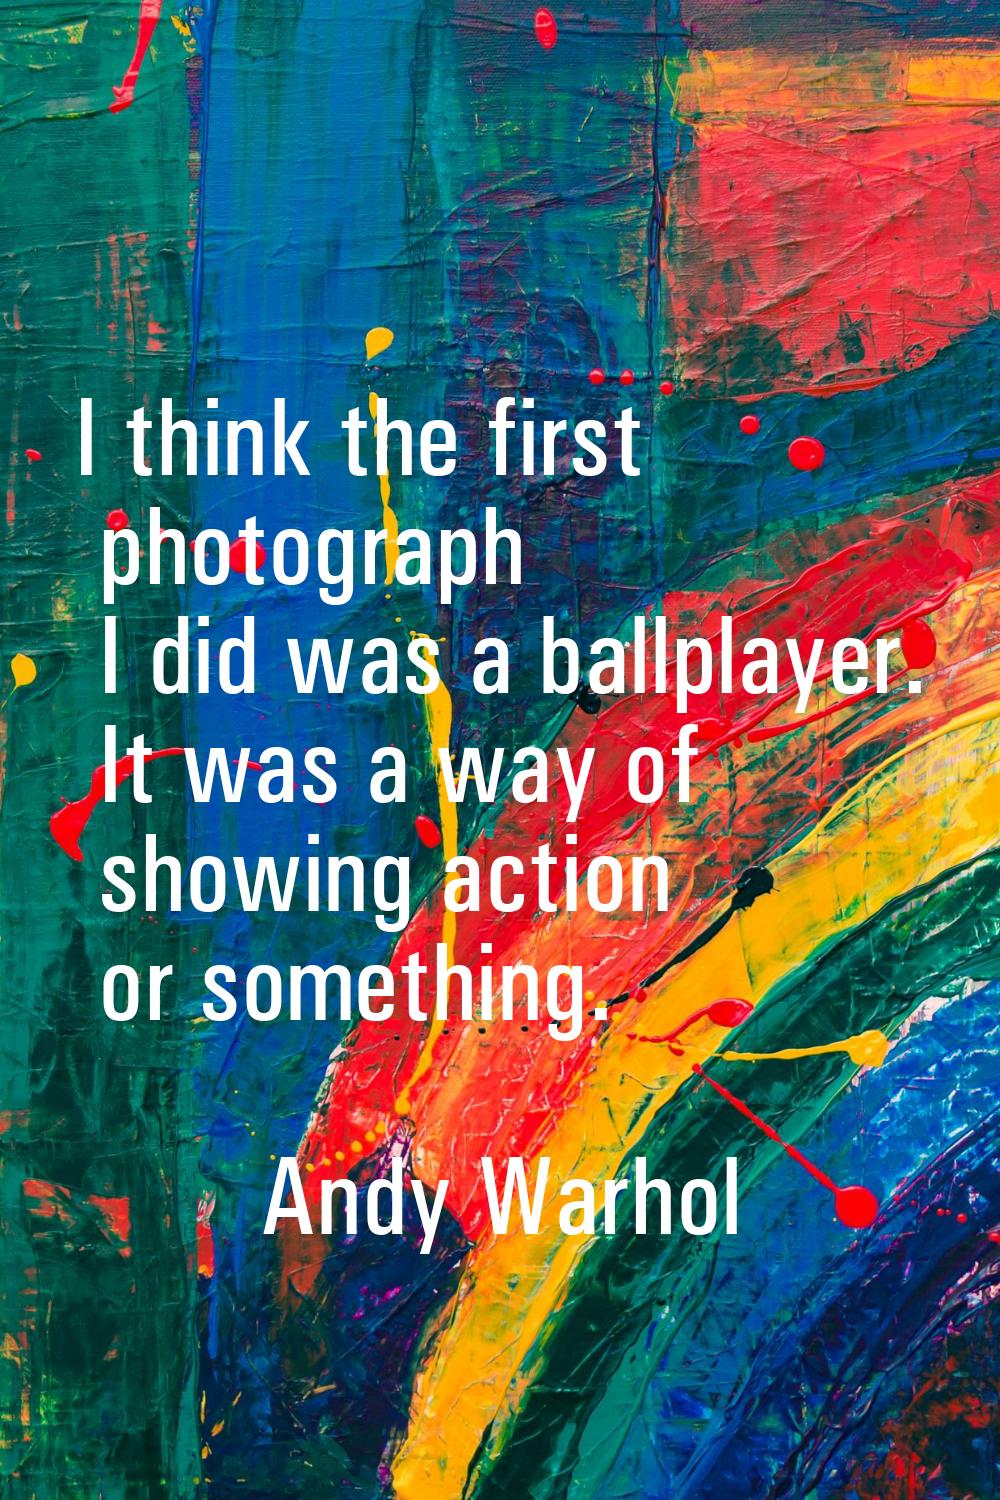 I think the first photograph I did was a ballplayer. It was a way of showing action or something.